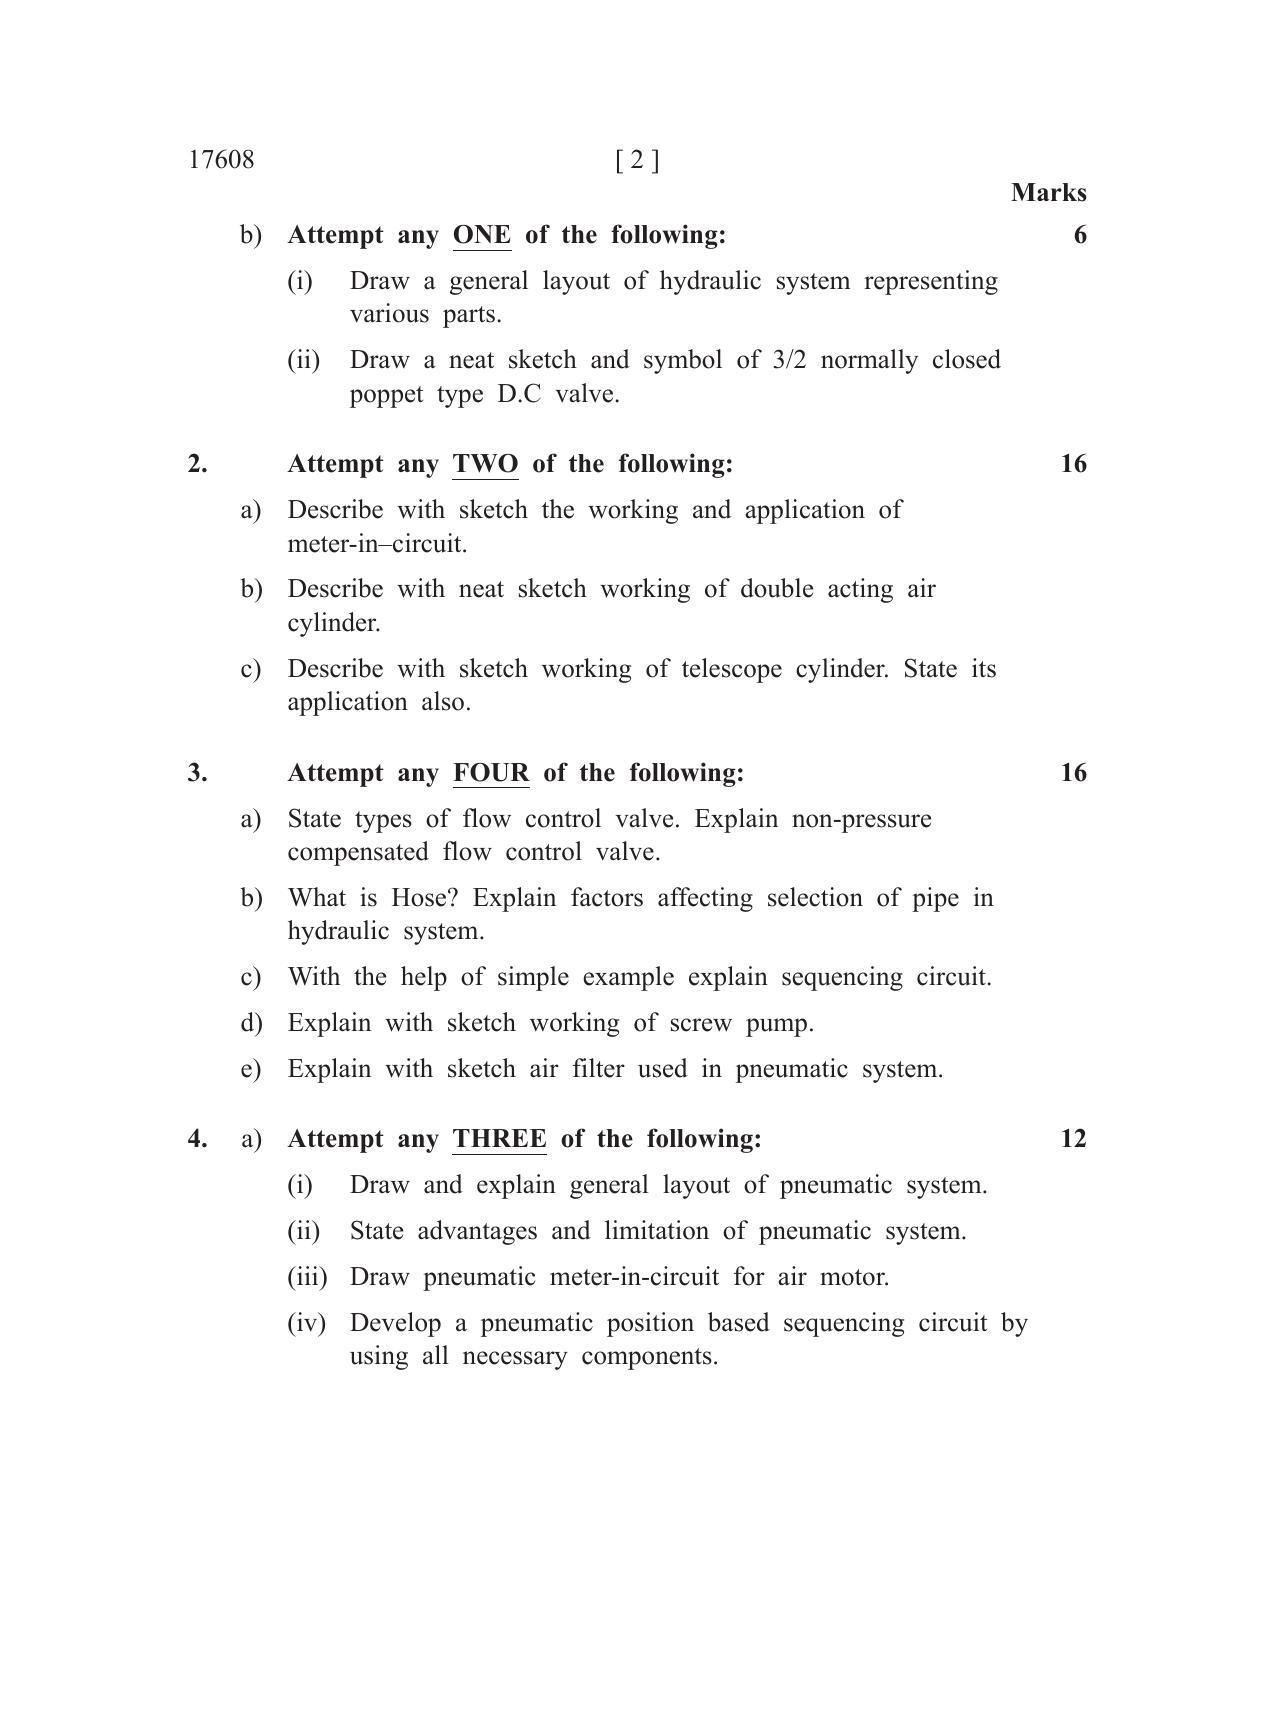 MSBTE Summer Question Paper 2019 - Industrial Fluid Power - Page 2